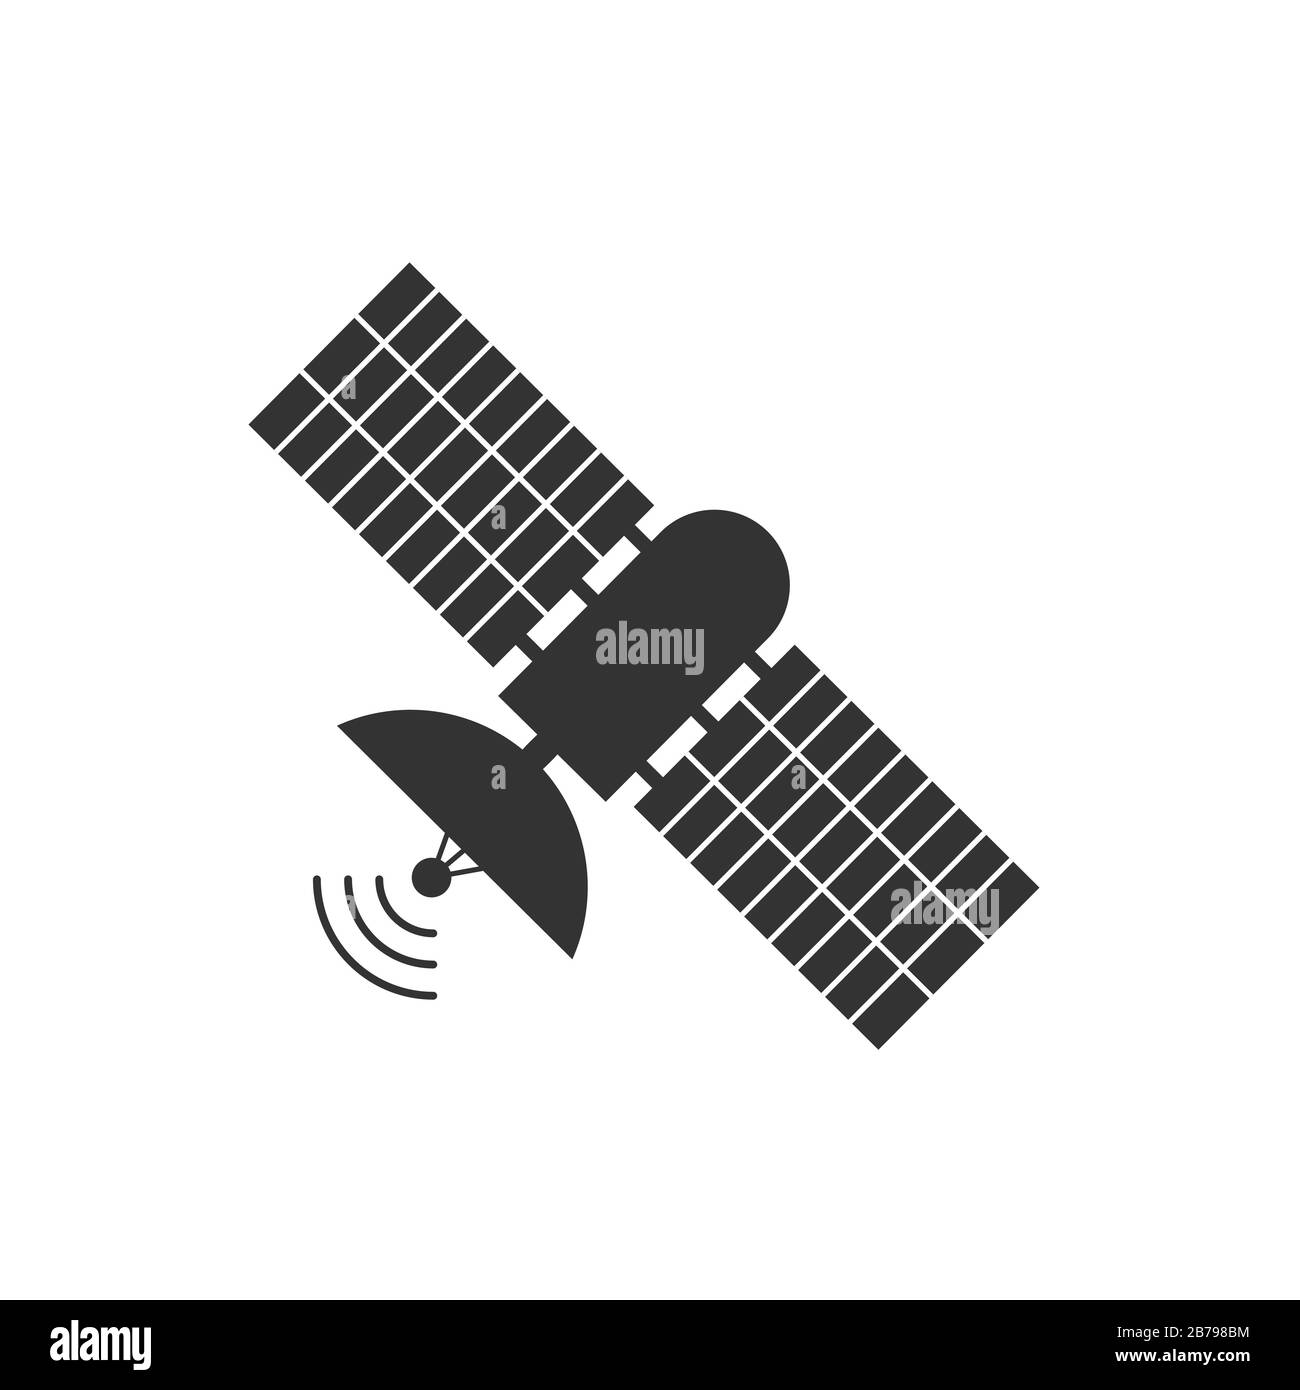 Satellite icon with an antenna and solar panels. Simple flat design for logos, apps and websites. Stock Vector